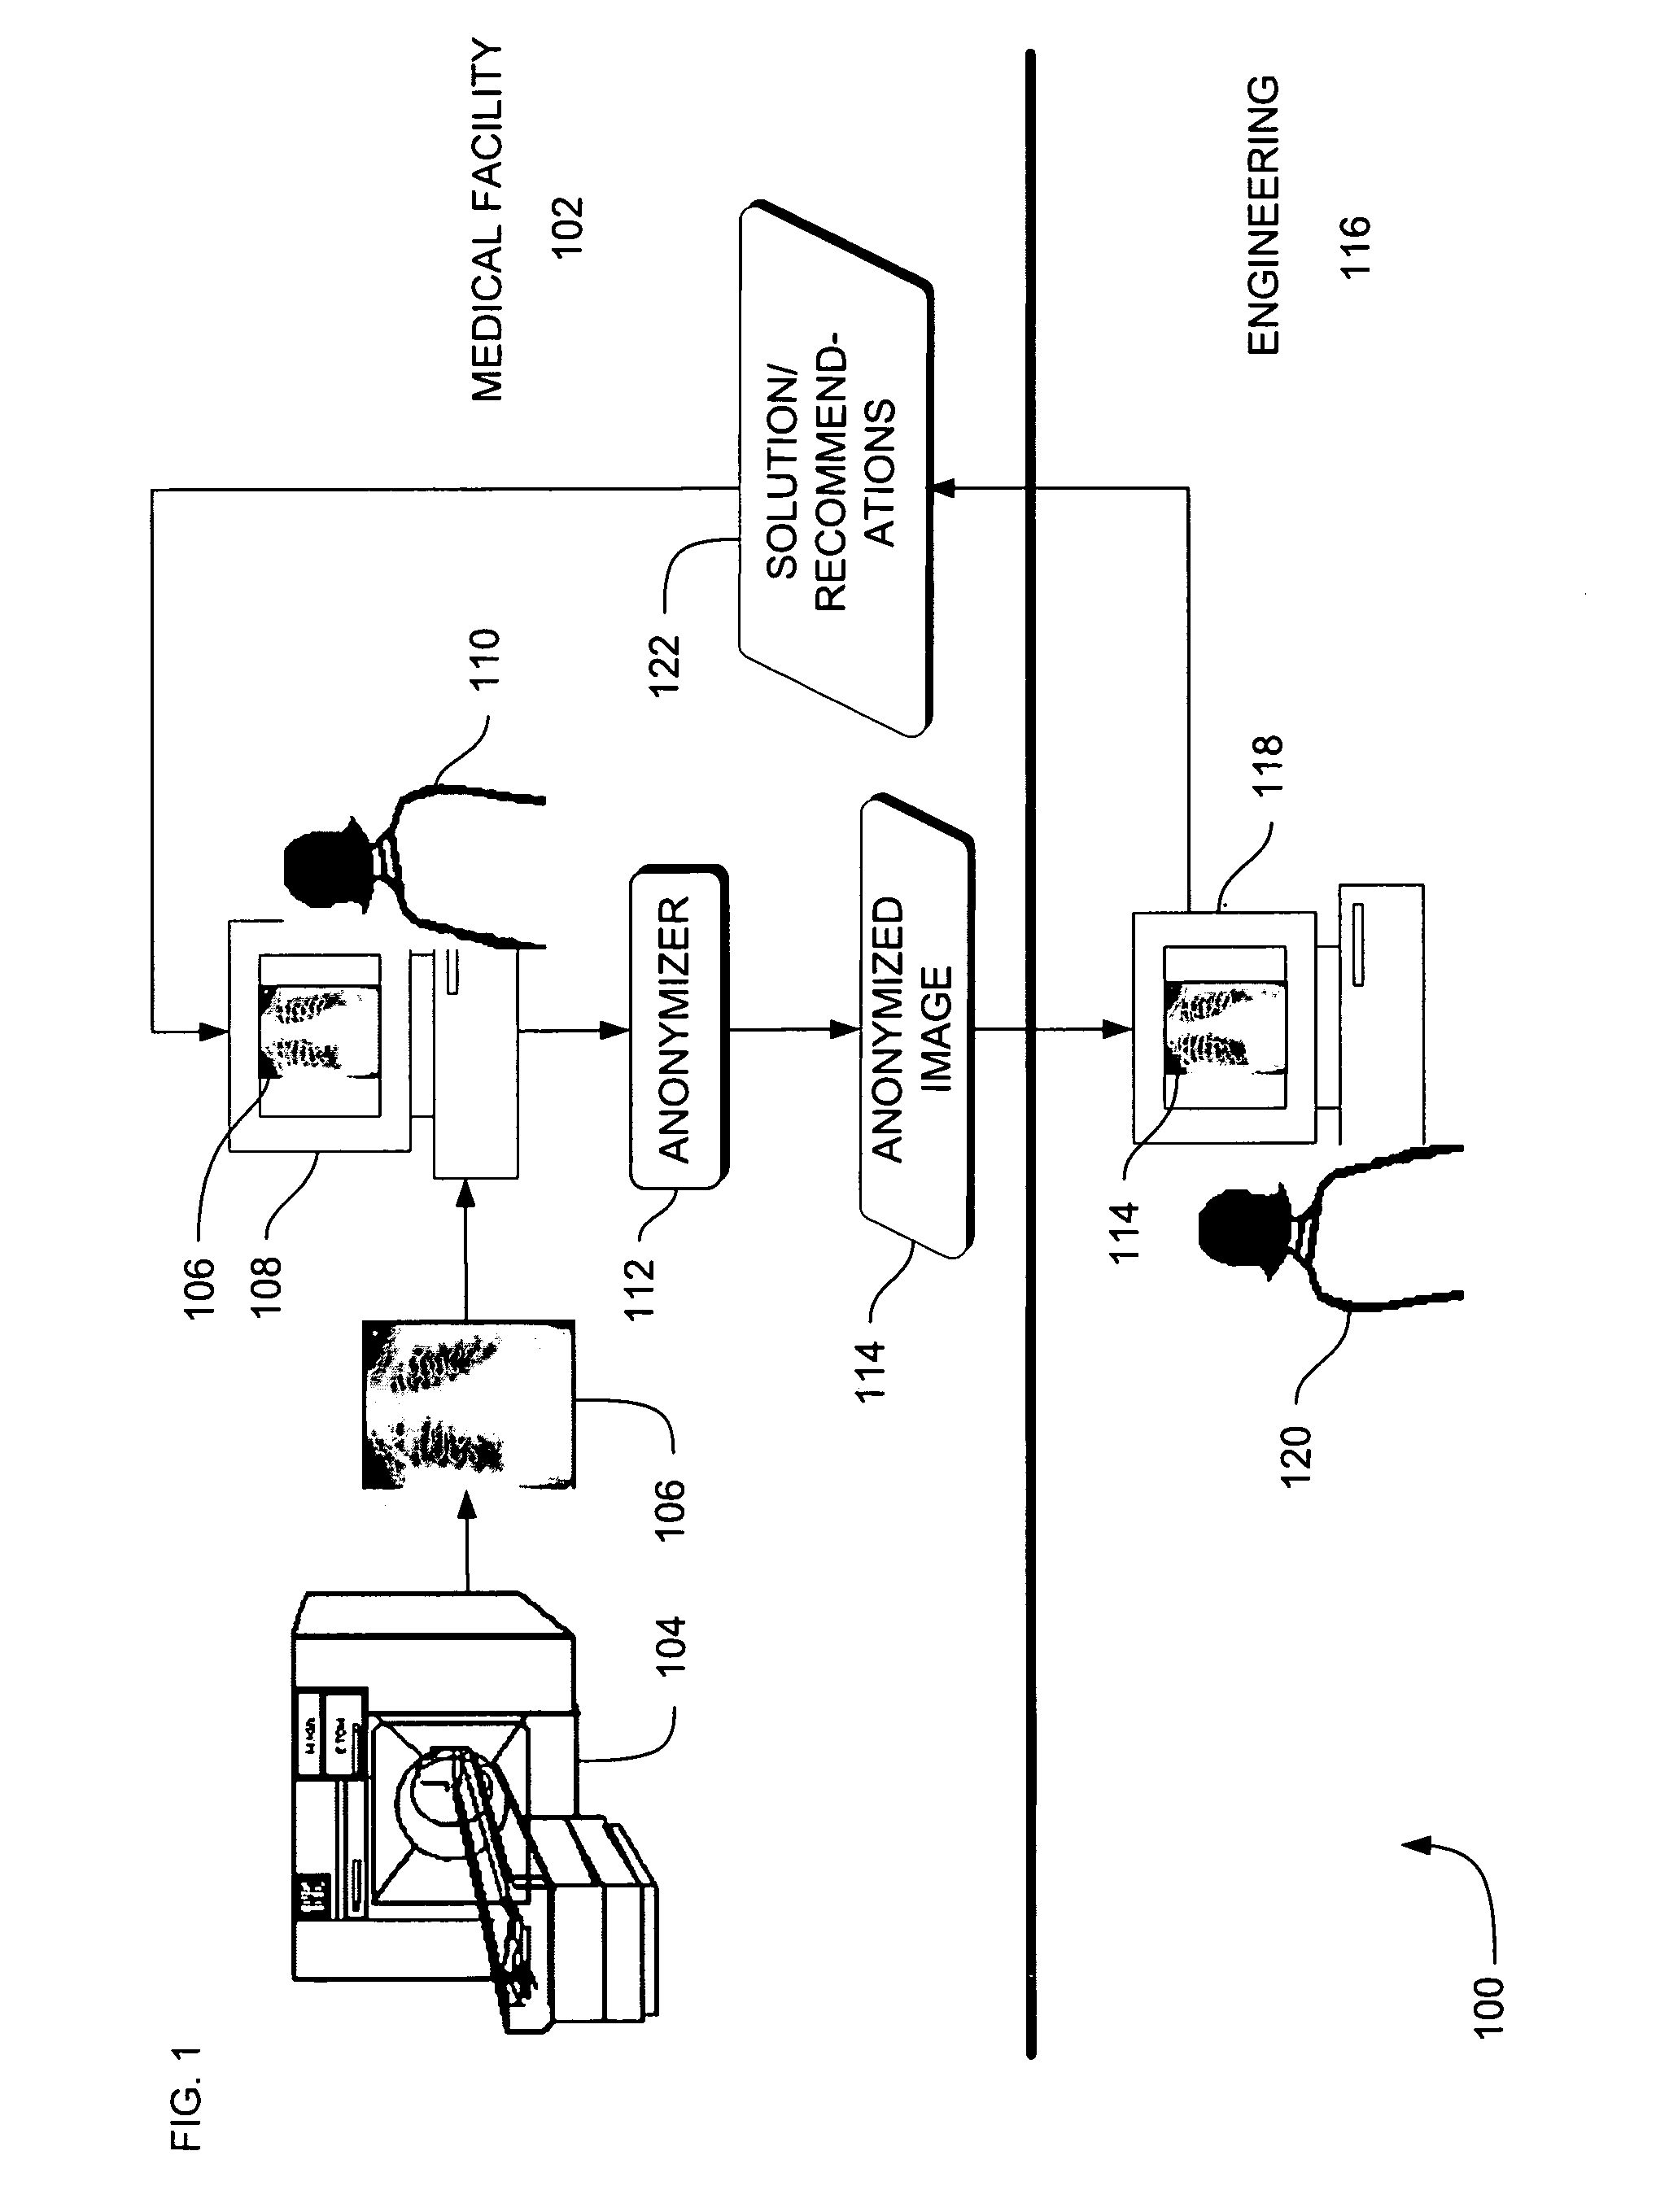 Systems, methods and apparatus to distribute images for quality control